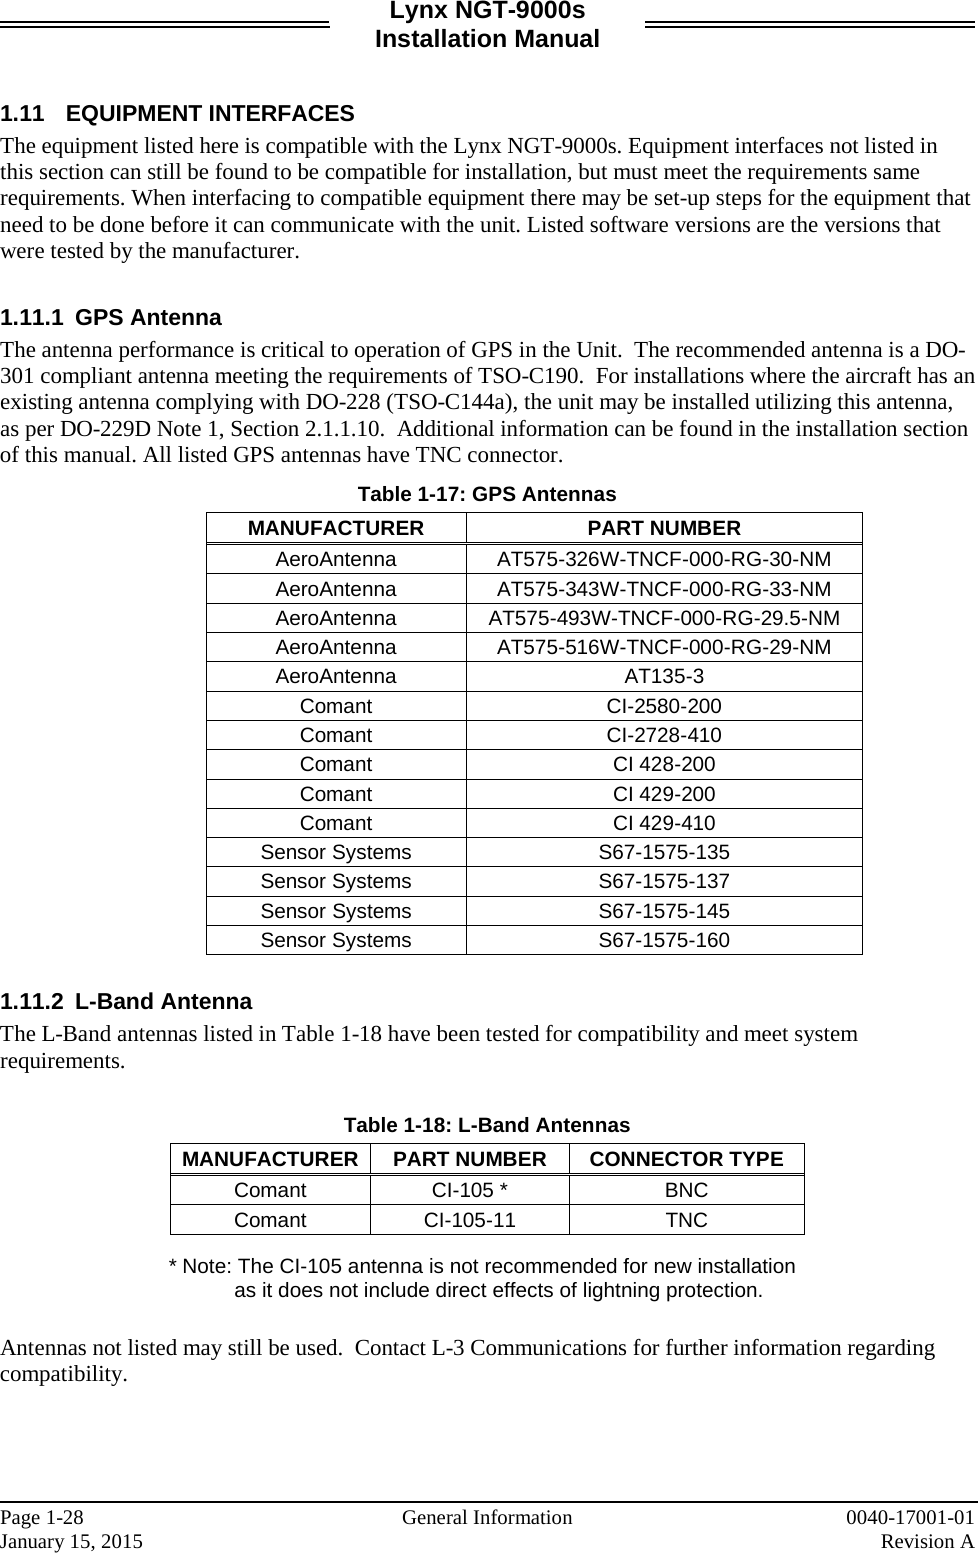 Lynx NGT-9000s Installation Manual   1.11 EQUIPMENT INTERFACES The equipment listed here is compatible with the Lynx NGT-9000s. Equipment interfaces not listed in this section can still be found to be compatible for installation, but must meet the requirements same requirements. When interfacing to compatible equipment there may be set-up steps for the equipment that need to be done before it can communicate with the unit. Listed software versions are the versions that were tested by the manufacturer.   1.11.1 GPS Antenna The antenna performance is critical to operation of GPS in the Unit.  The recommended antenna is a DO-301 compliant antenna meeting the requirements of TSO-C190.  For installations where the aircraft has an existing antenna complying with DO-228 (TSO-C144a), the unit may be installed utilizing this antenna, as per DO-229D Note 1, Section 2.1.1.10.  Additional information can be found in the installation section of this manual. All listed GPS antennas have TNC connector.   Table 1-17: GPS Antennas MANUFACTURER PART NUMBER AeroAntenna AT575-326W-TNCF-000-RG-30-NM AeroAntenna AT575-343W-TNCF-000-RG-33-NM AeroAntenna AT575-493W-TNCF-000-RG-29.5-NM AeroAntenna AT575-516W-TNCF-000-RG-29-NM AeroAntenna AT135-3 Comant CI-2580-200 Comant CI-2728-410 Comant CI 428-200 Comant CI 429-200 Comant CI 429-410 Sensor Systems S67-1575-135 Sensor Systems S67-1575-137 Sensor Systems S67-1575-145 Sensor Systems S67-1575-160  1.11.2  L-Band Antenna The L-Band antennas listed in Table 1-18 have been tested for compatibility and meet system requirements.  Table 1-18: L-Band Antennas MANUFACTURER PART NUMBER CONNECTOR TYPE Comant CI-105 * BNC Comant CI-105-11 TNC  * Note: The CI-105 antenna is not recommended for new installation as it does not include direct effects of lightning protection.   Antennas not listed may still be used.  Contact L-3 Communications for further information regarding compatibility.    Page 1-28   General Information 0040-17001-01 January 15, 2015    Revision A  